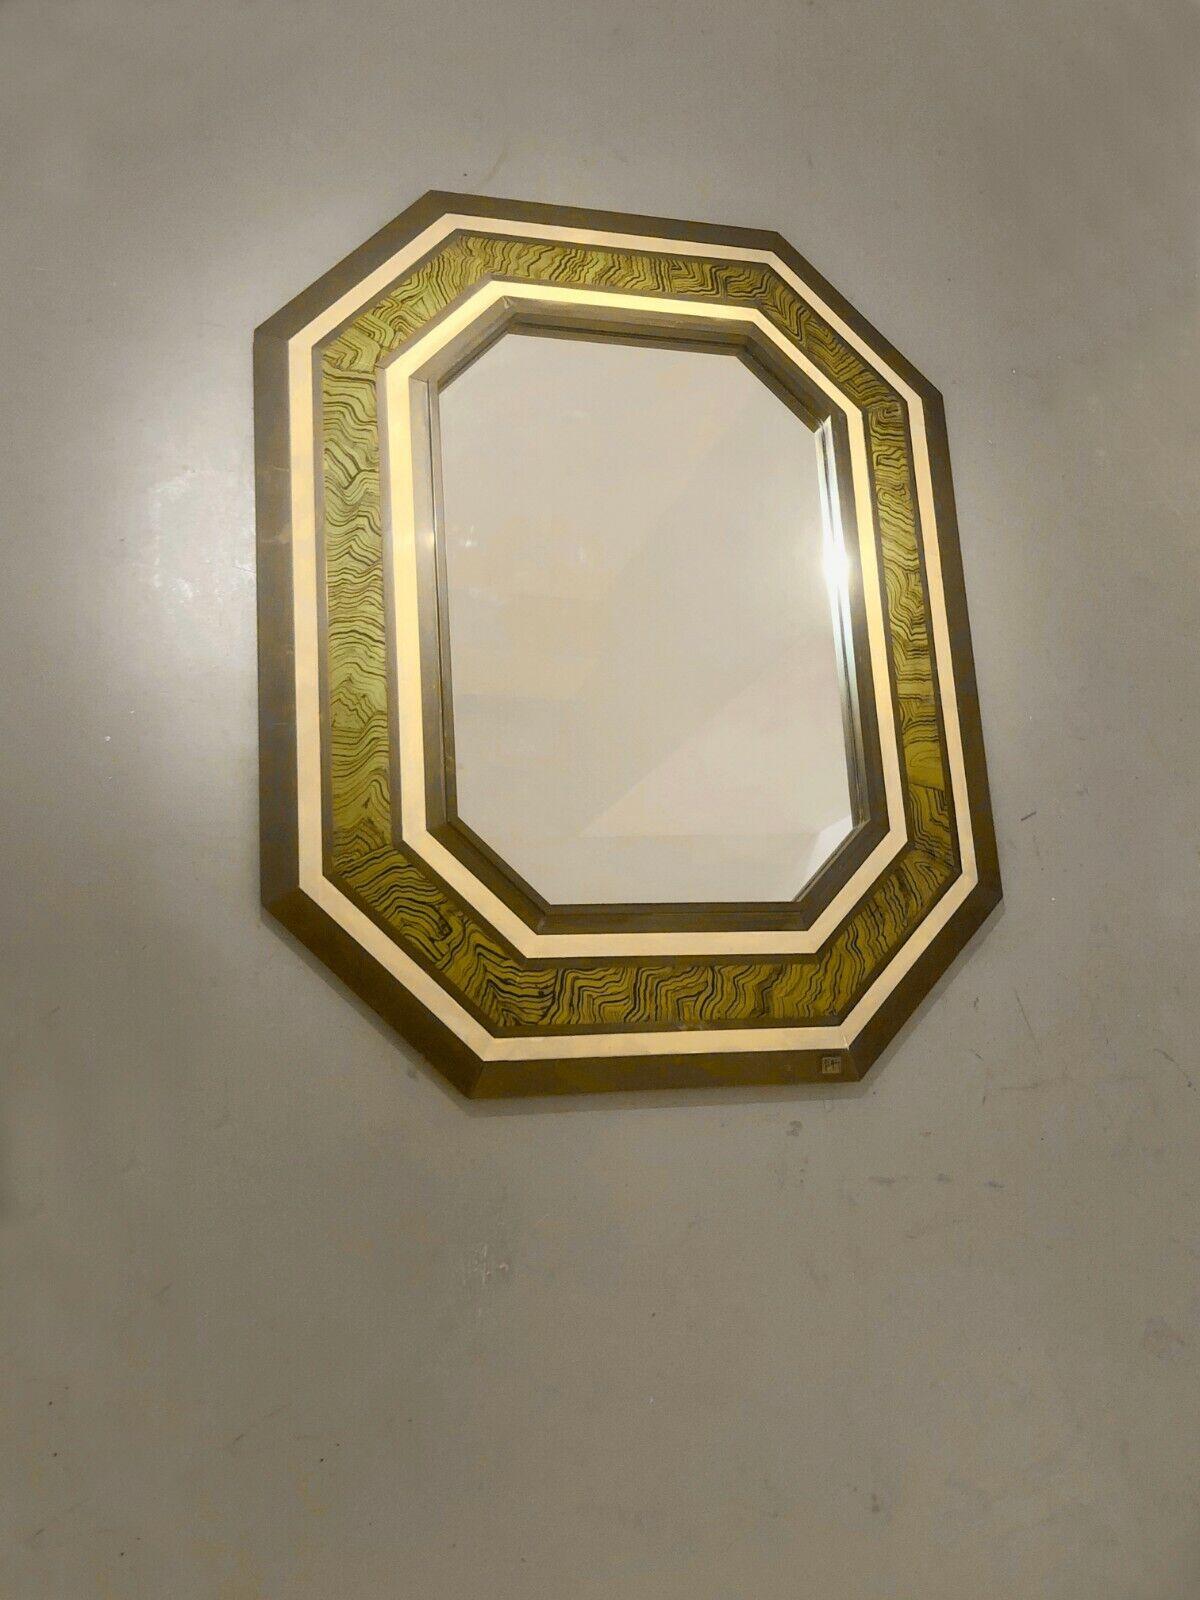 A HUGE SPECTACULAR SHABBY-CHIC Wall MIRROR by JEAN-CLAUDE MAHEY, France 1970 For Sale 2